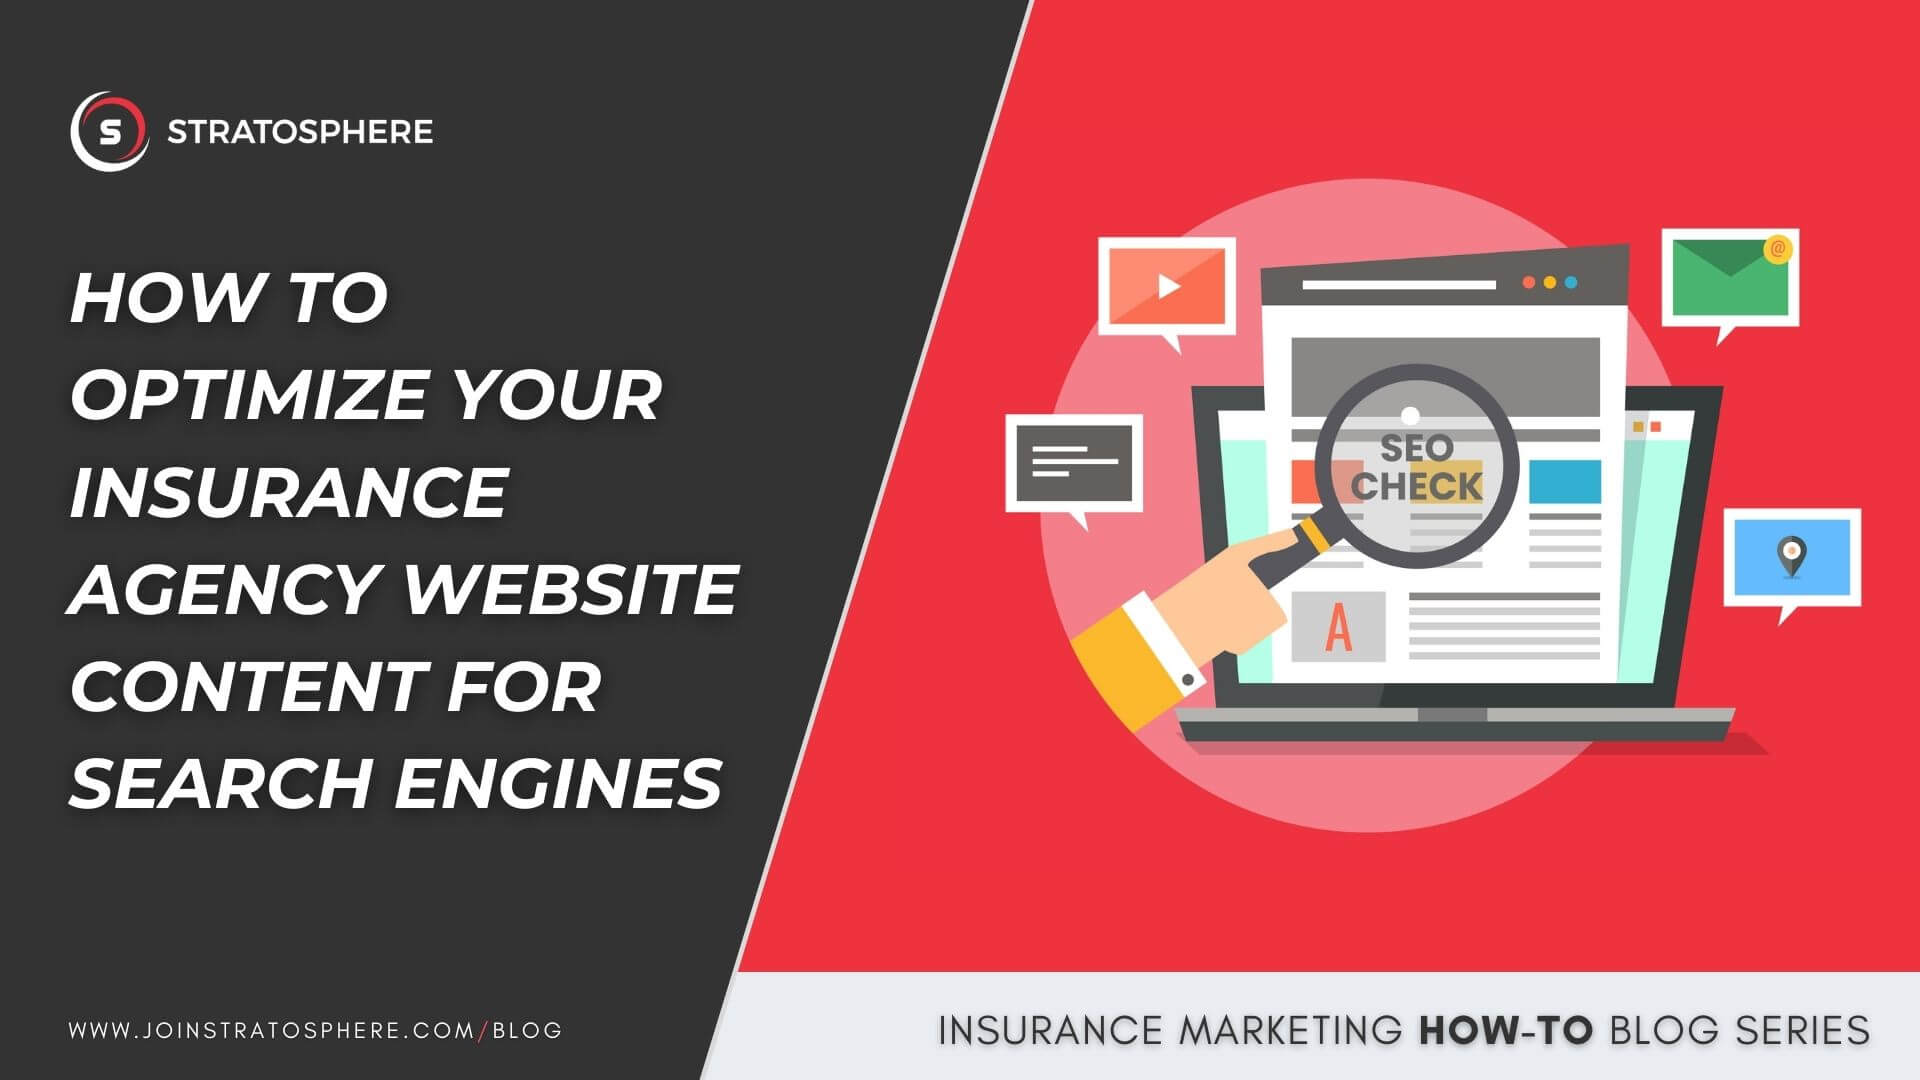 How to Optimize Your Insurance Agency Website Content for Search Engines